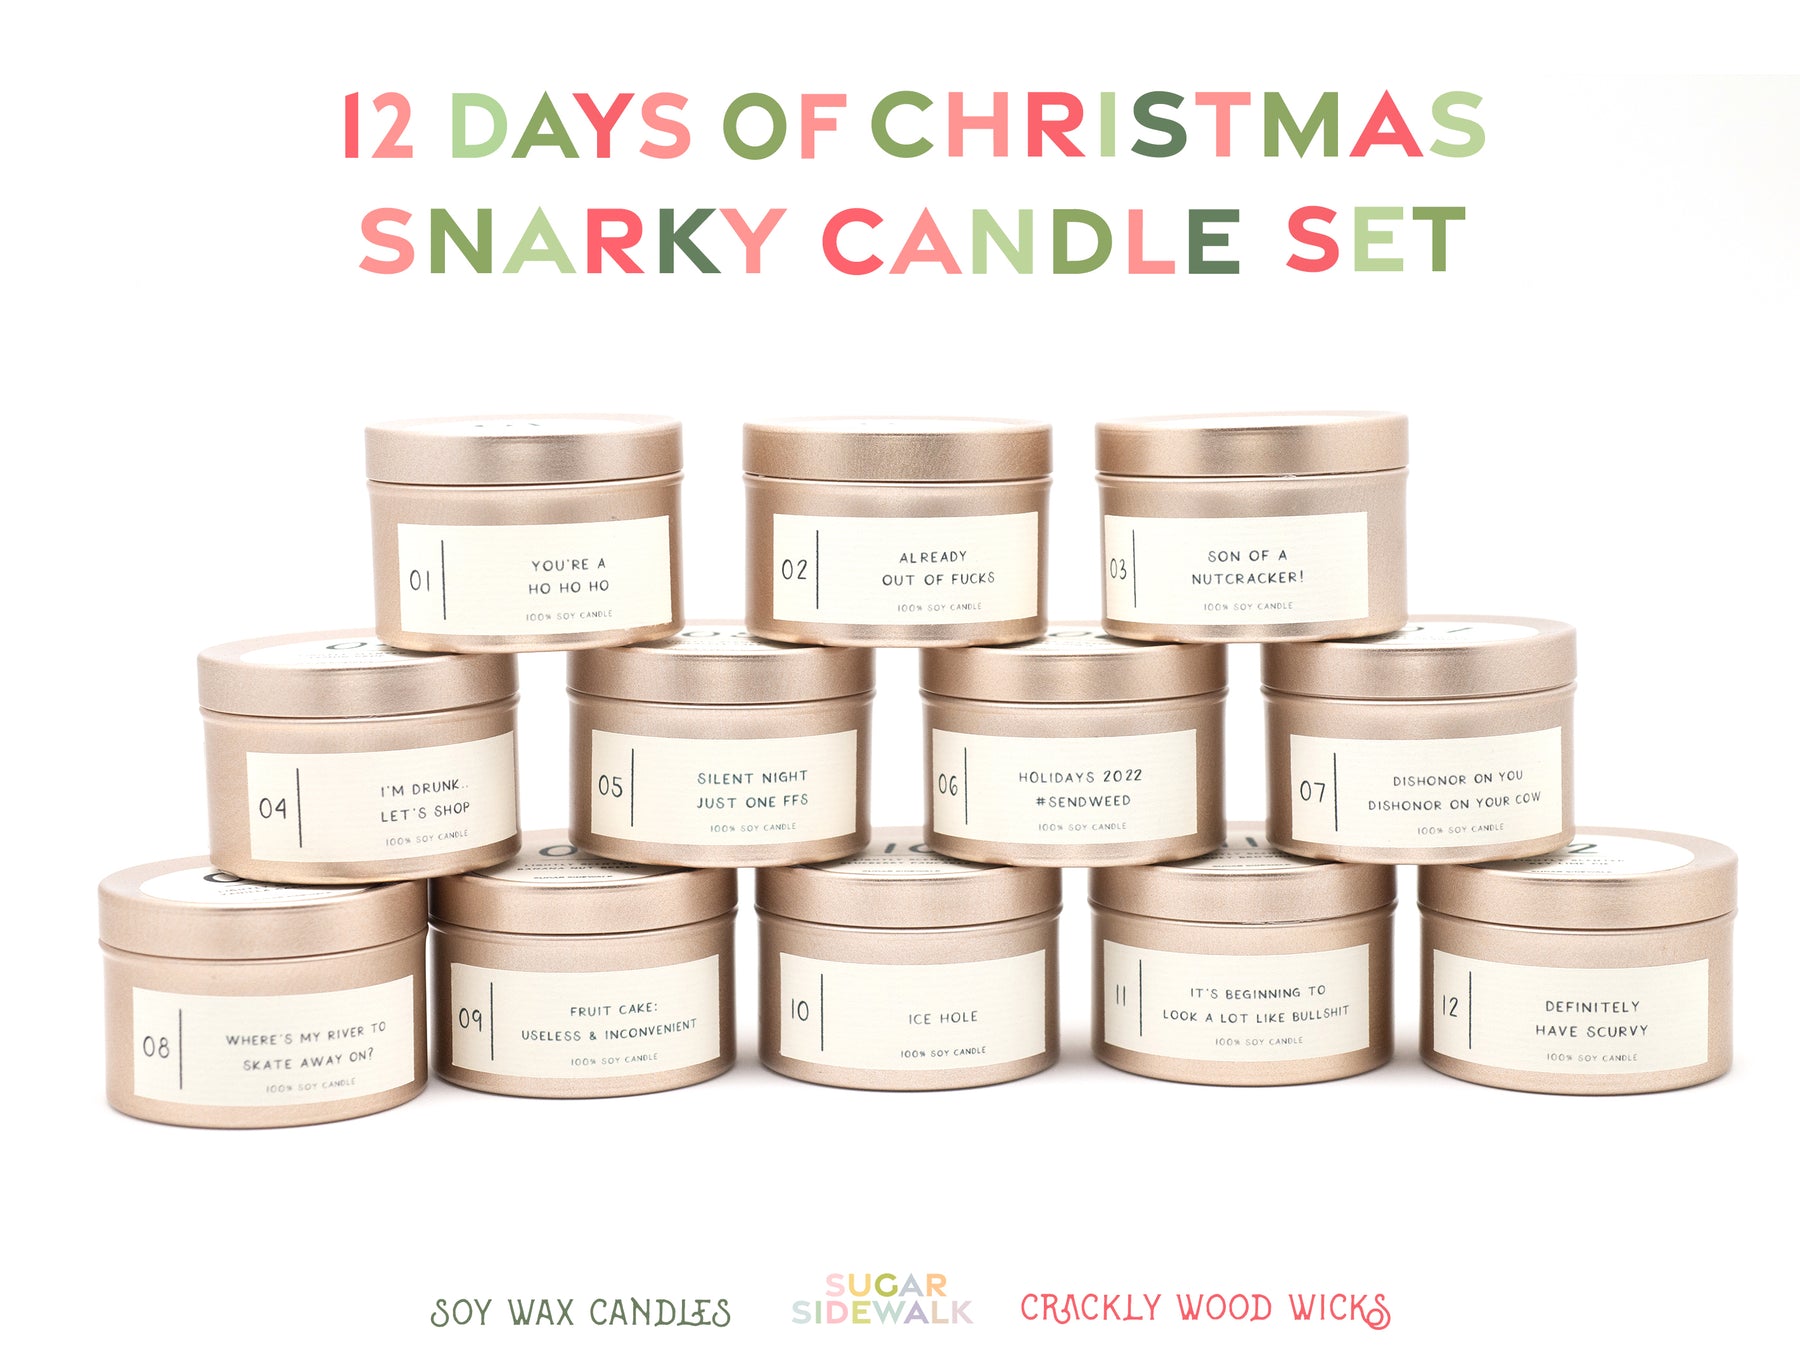 12 Days of Christmas Candle Gift Set with Funny PG-13 Labels